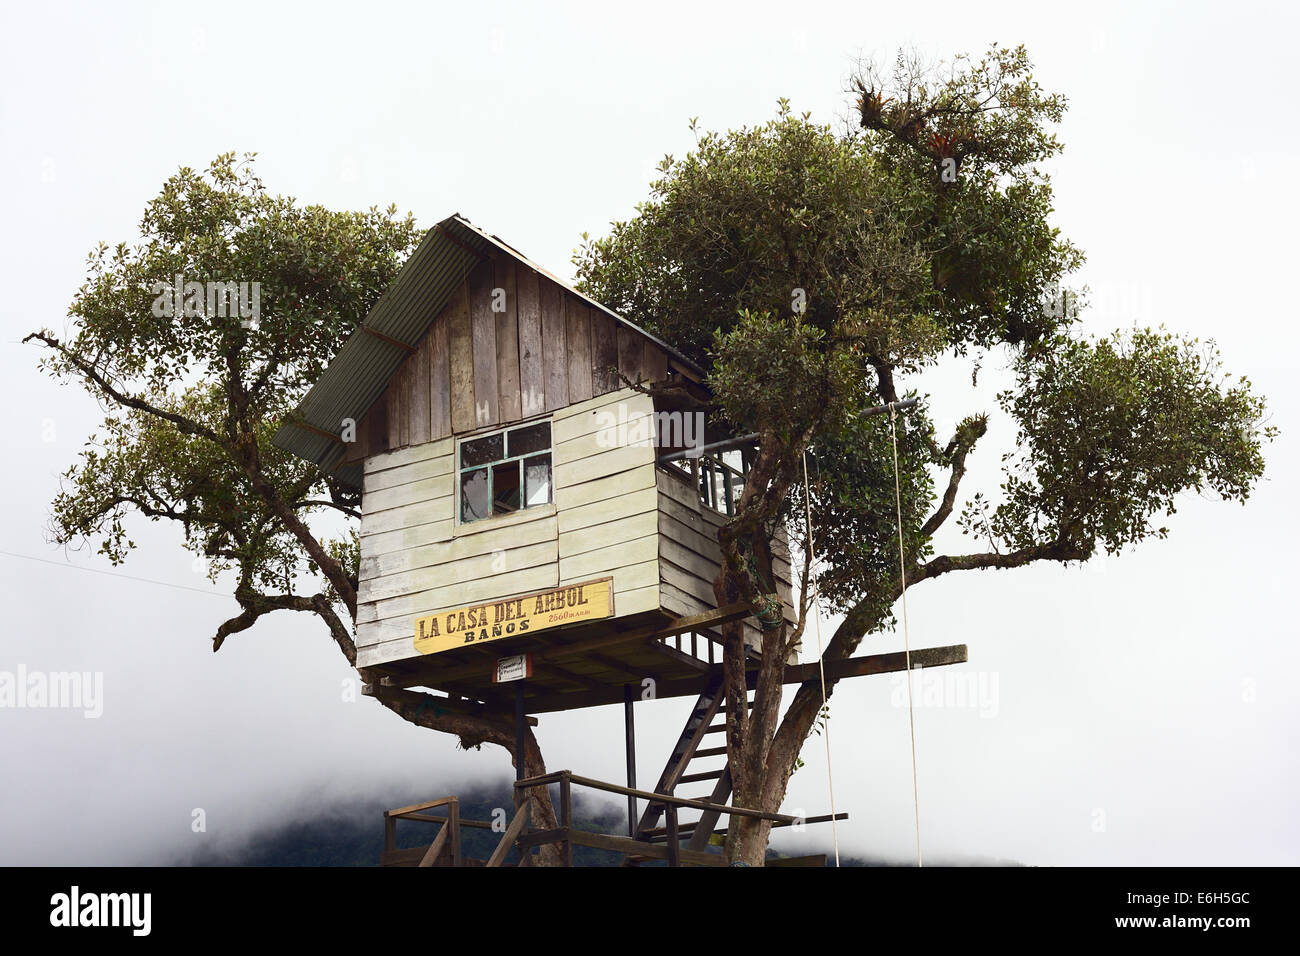 RUNTUN, ECUADOR - FEBRUARY 27, 2014: La Casa del Arbol (The Tree House) close to the small village of Runtun with clouds behind Stock Photo